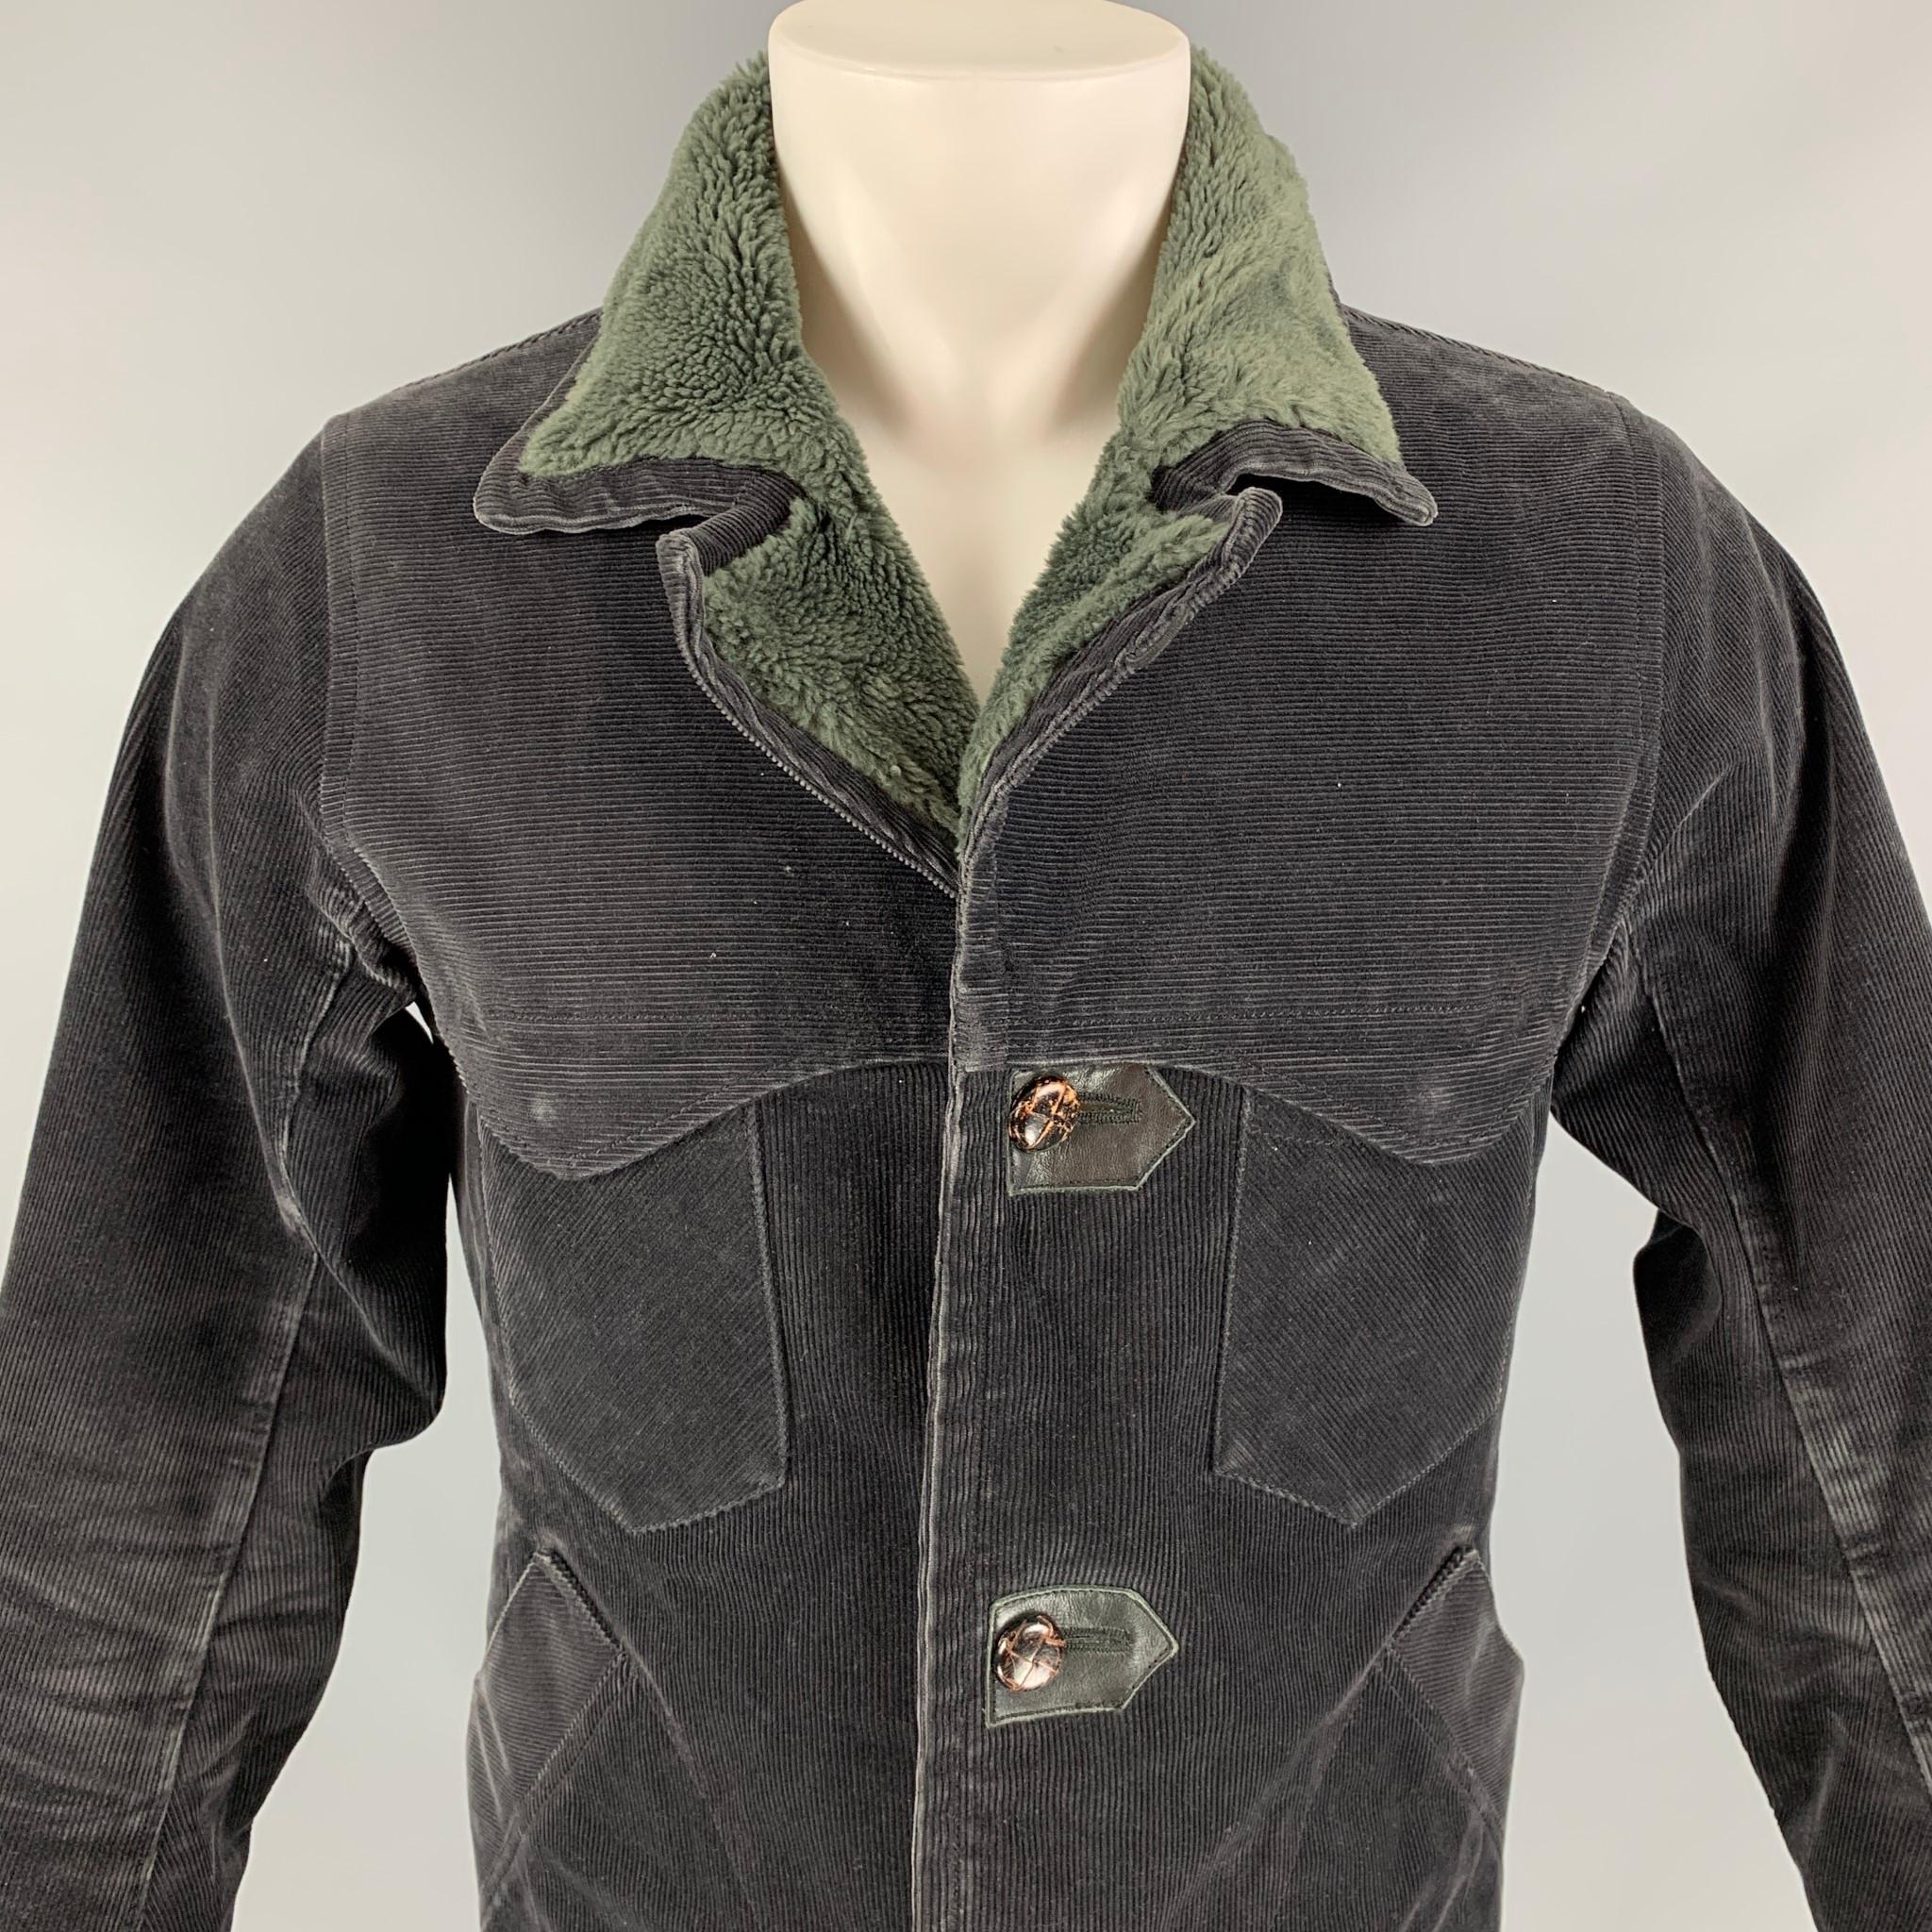 NONNATIVE jacket comes in a brown & green corduroy cotton with a faux fur liner featuring a gore-text material, leather trim, zipper sleeves, and a wooden button closure. 

Very Good Pre-Owned Condition.
Marked: 1

Measurements:

Shoulder: 16.5